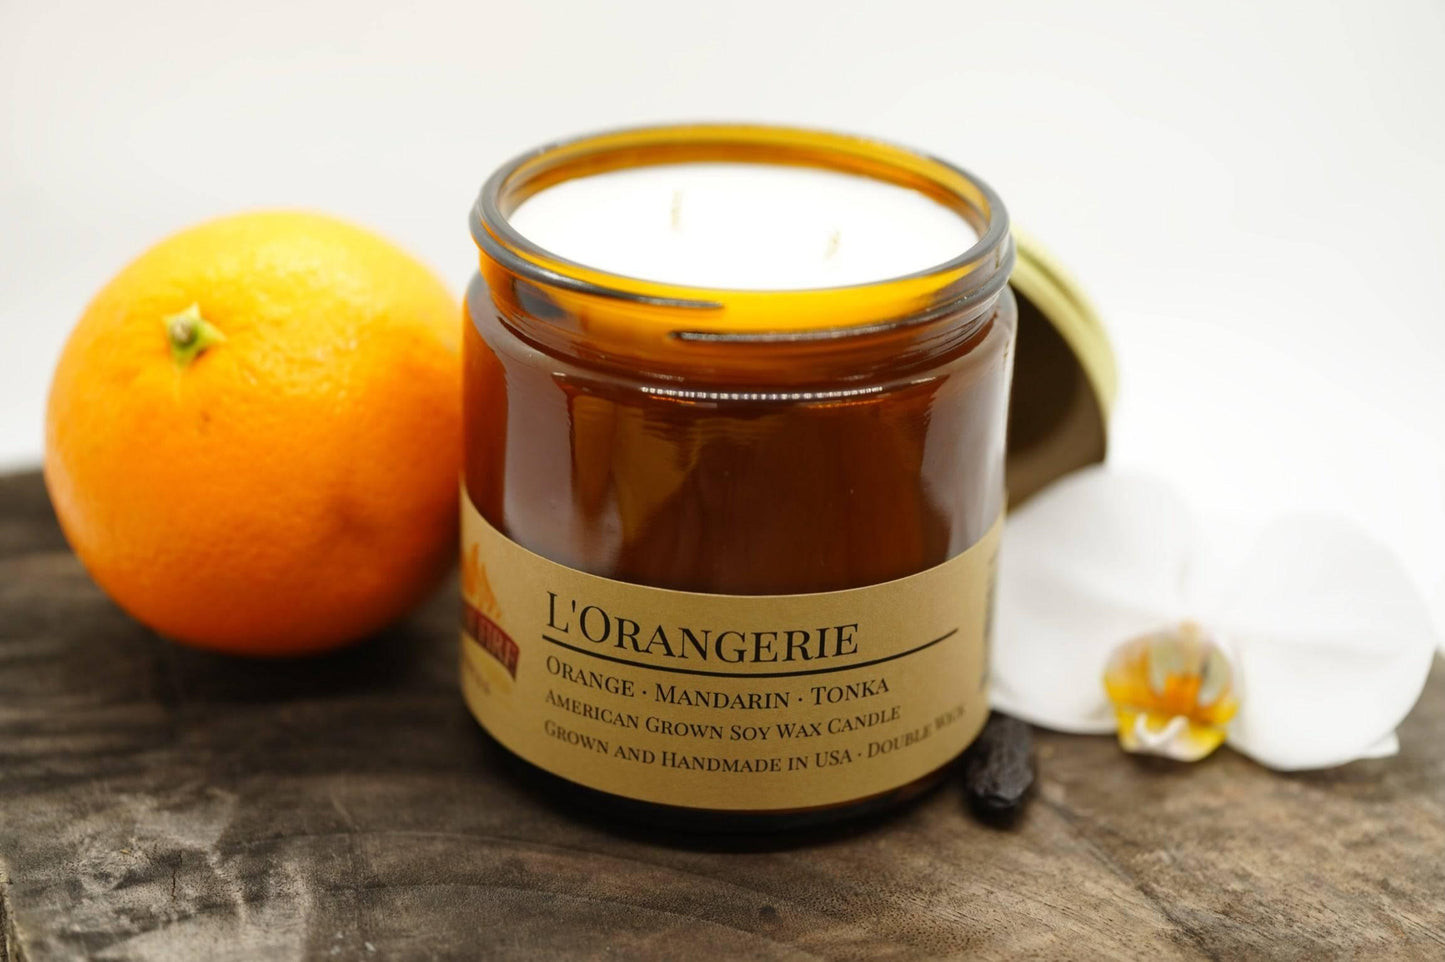 l'orangerie soy wax candle | 16 oz double wick amber apothecary jar by prairie fire tallow, candles, and lavender